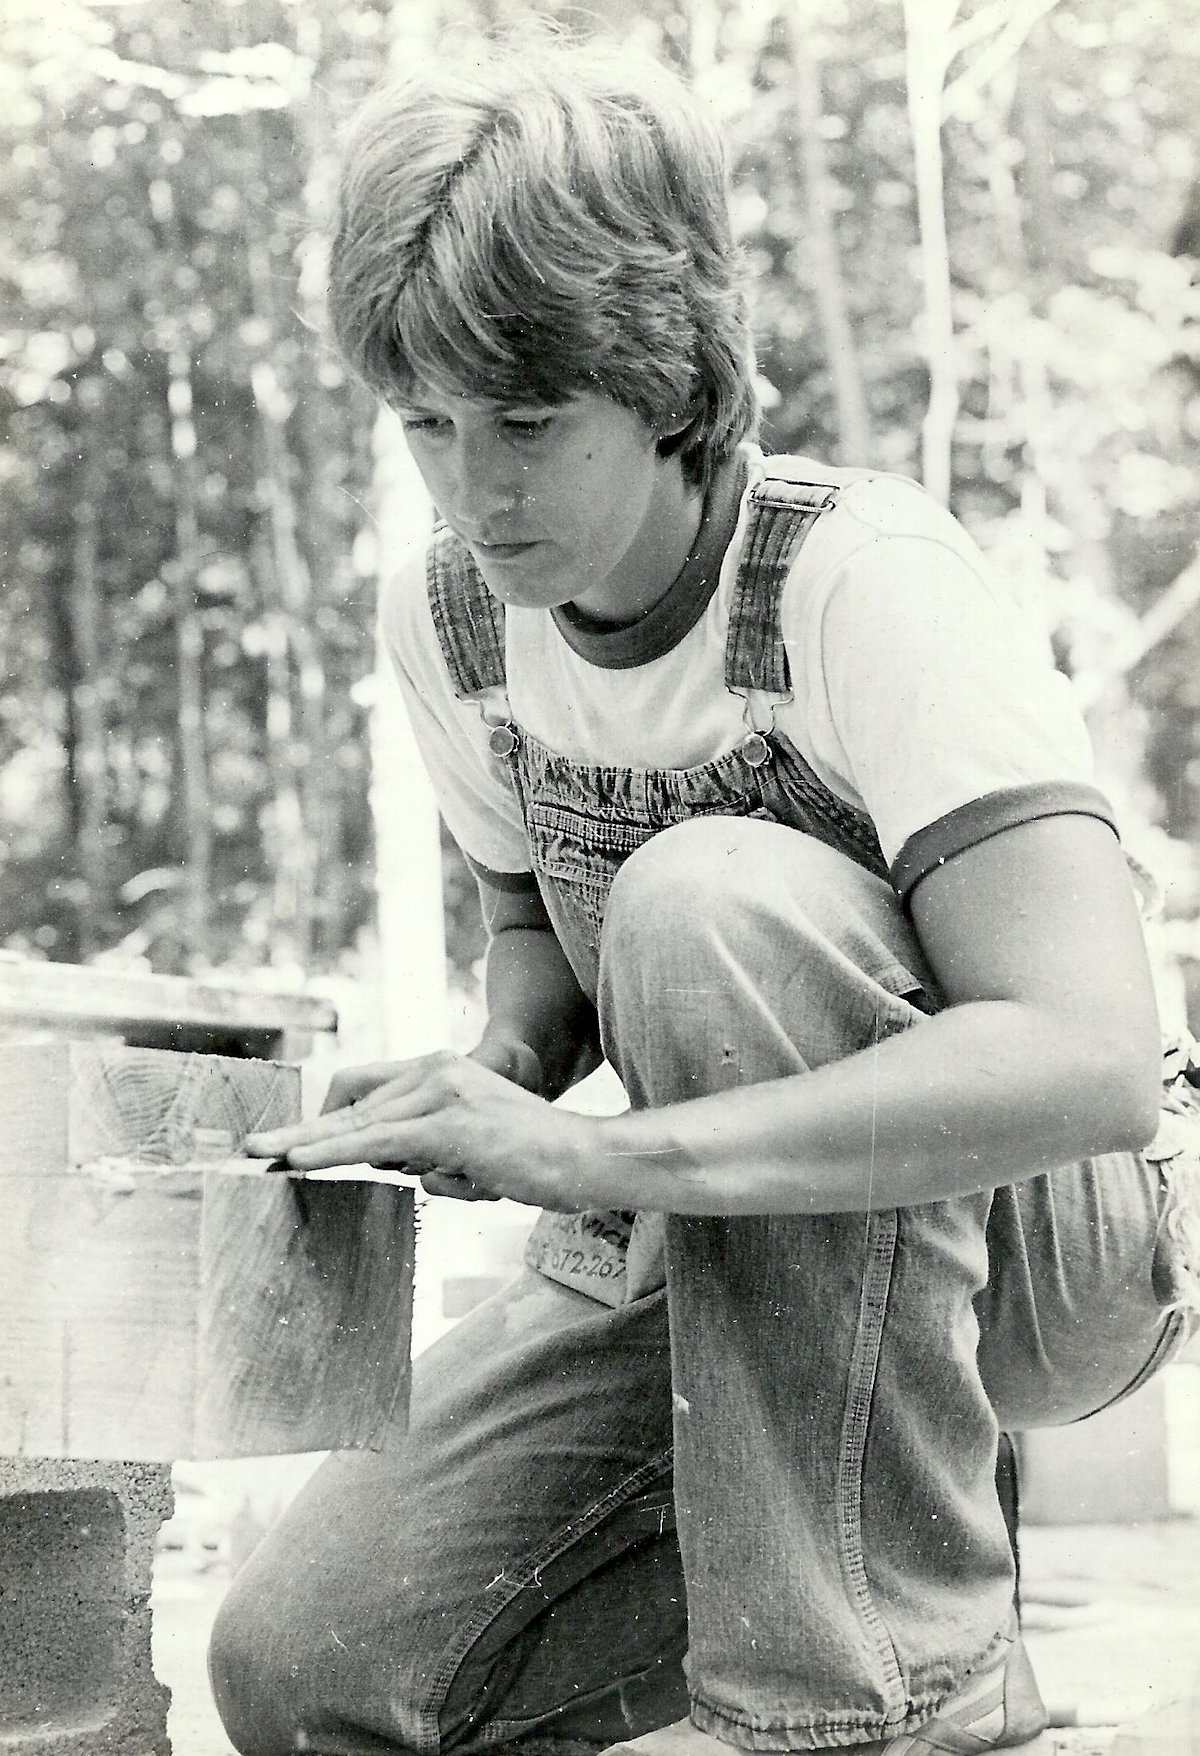 Kim (age 24) working in timber frame construction in Monticello, KY, 1981.